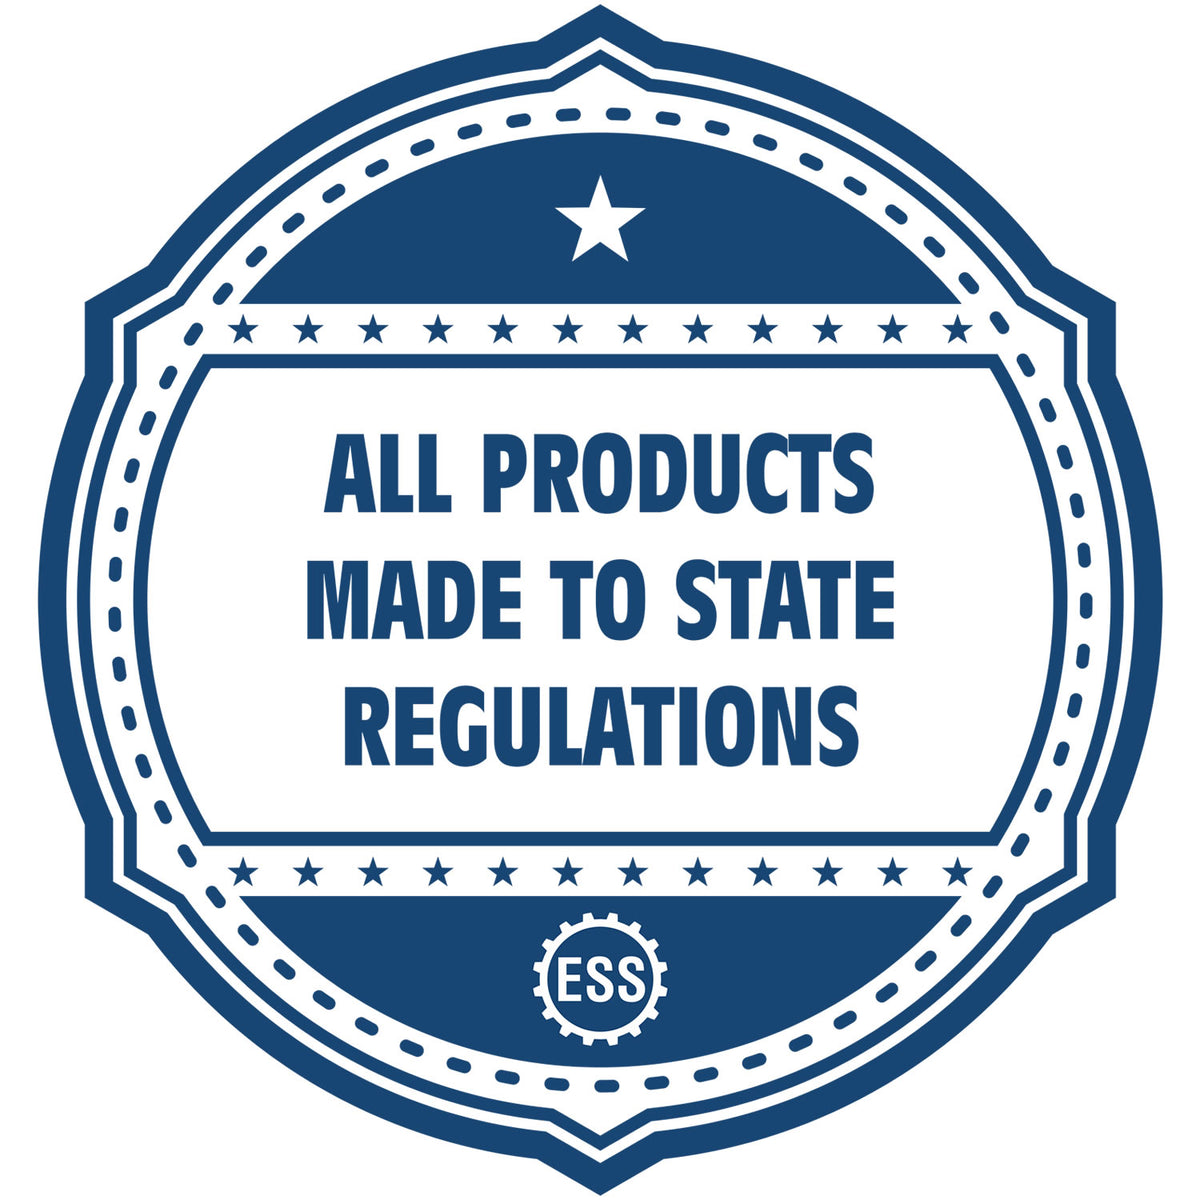 A blue icon or badge for the Hybrid Maine Landscape Architect Seal showing that this product is made in compliance with state regulations.